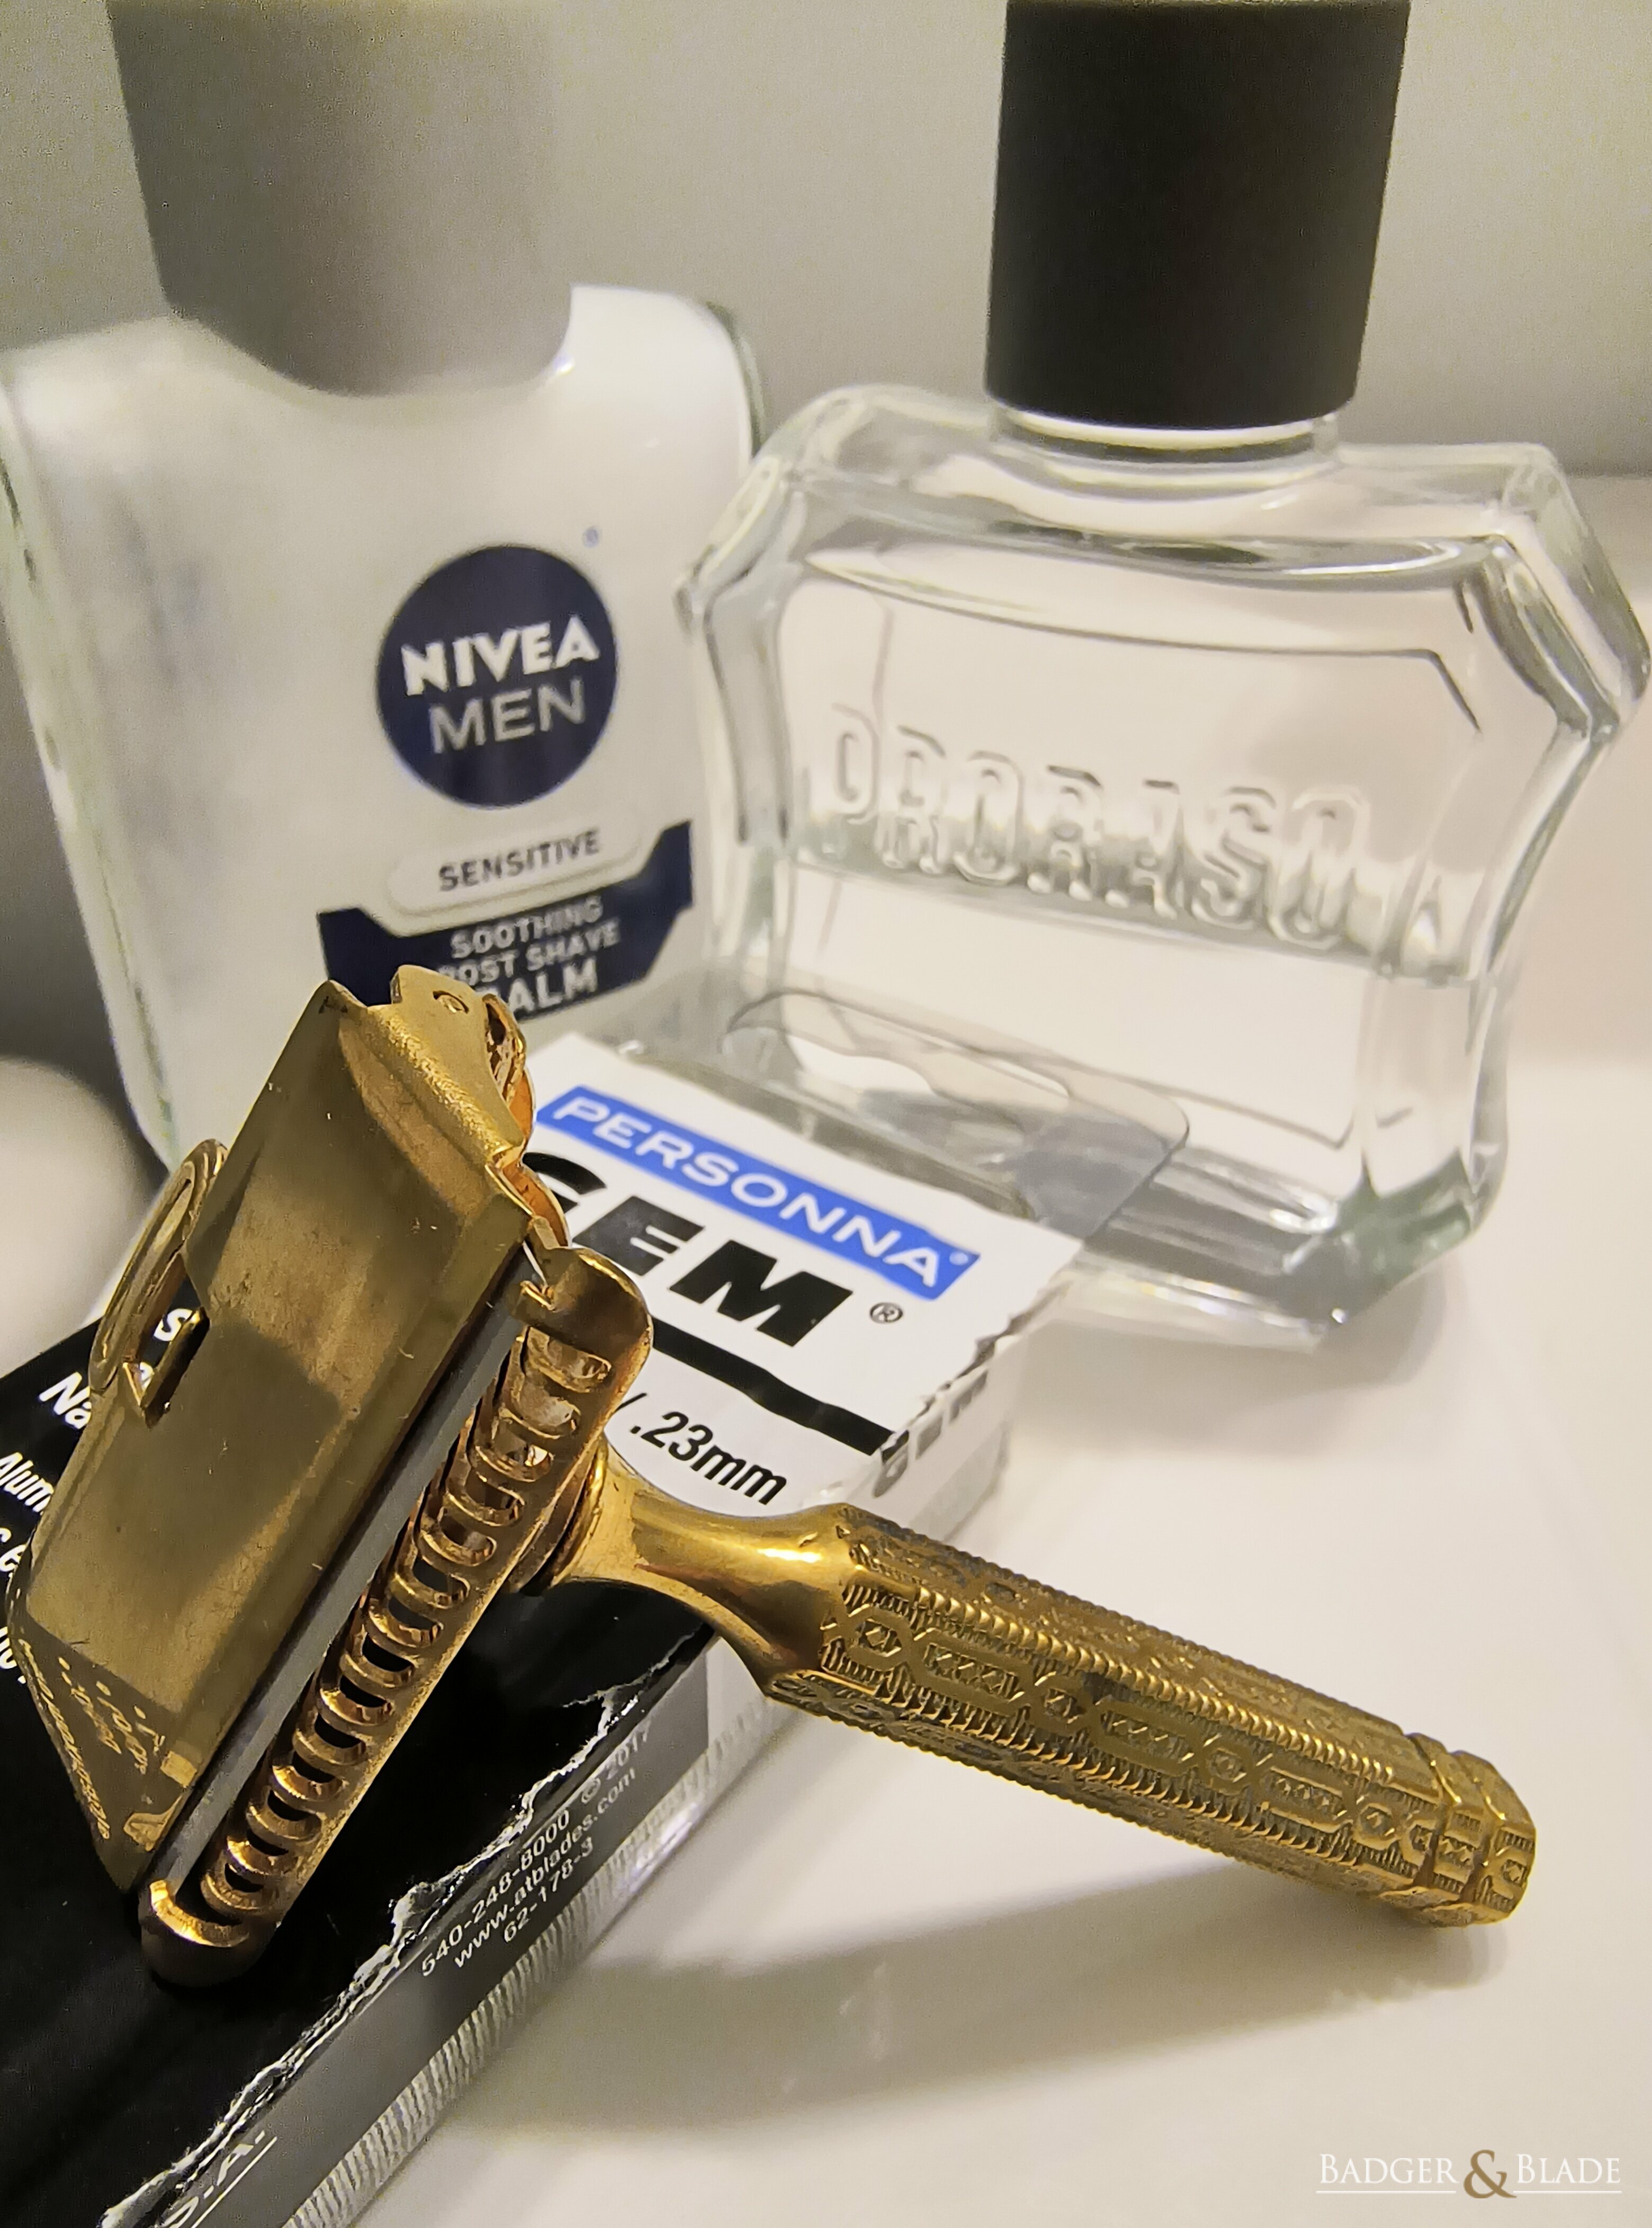 What razor/blade did you use today | Page 9565 | Badger & Blade